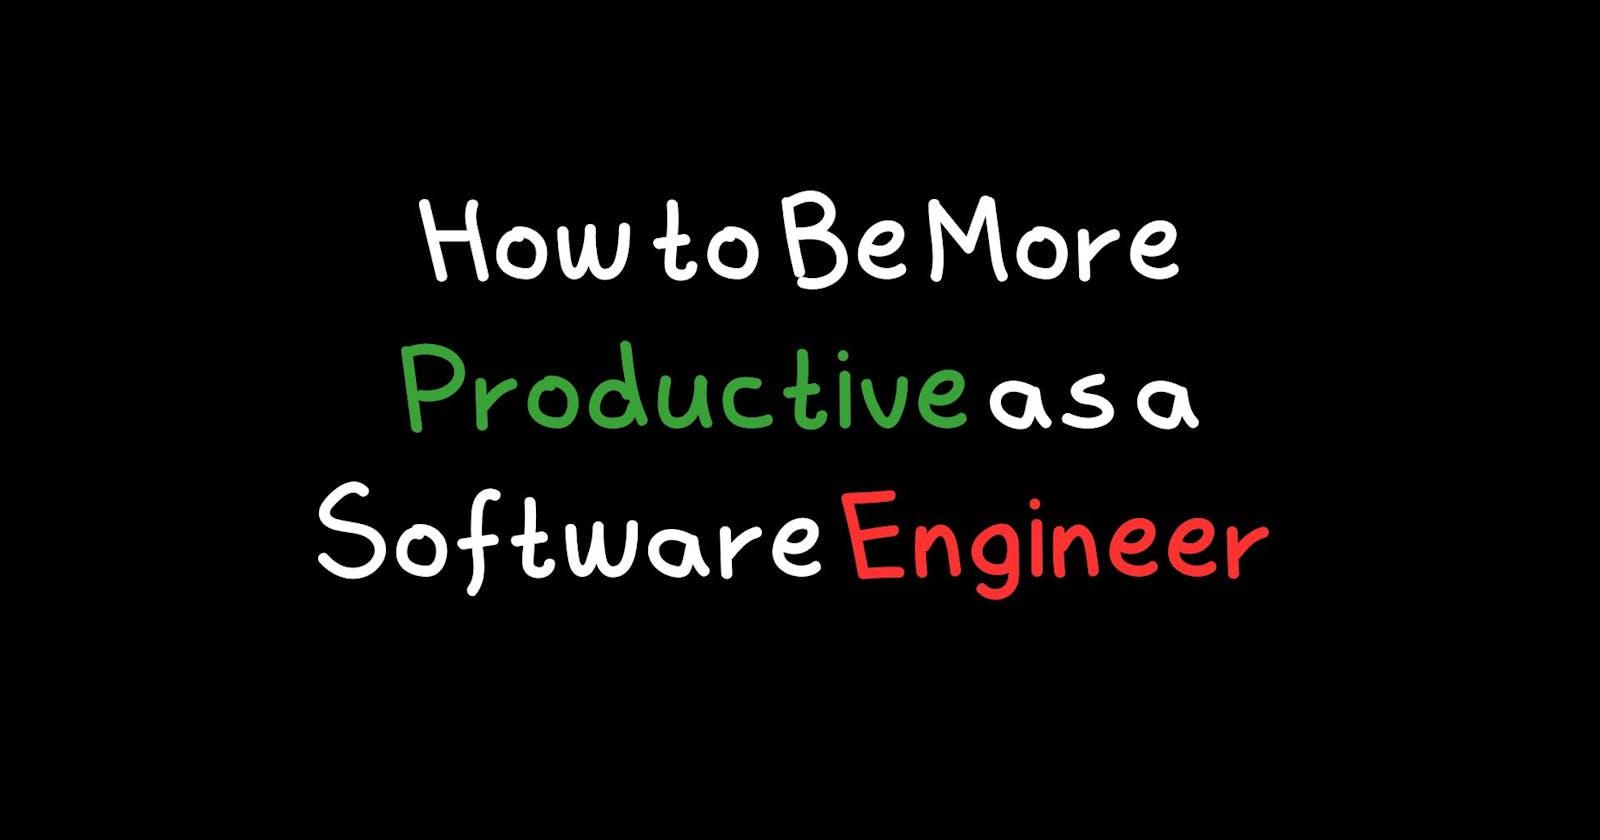 How to Be More Productive as a Software Engineer (It's Not What You Expect)